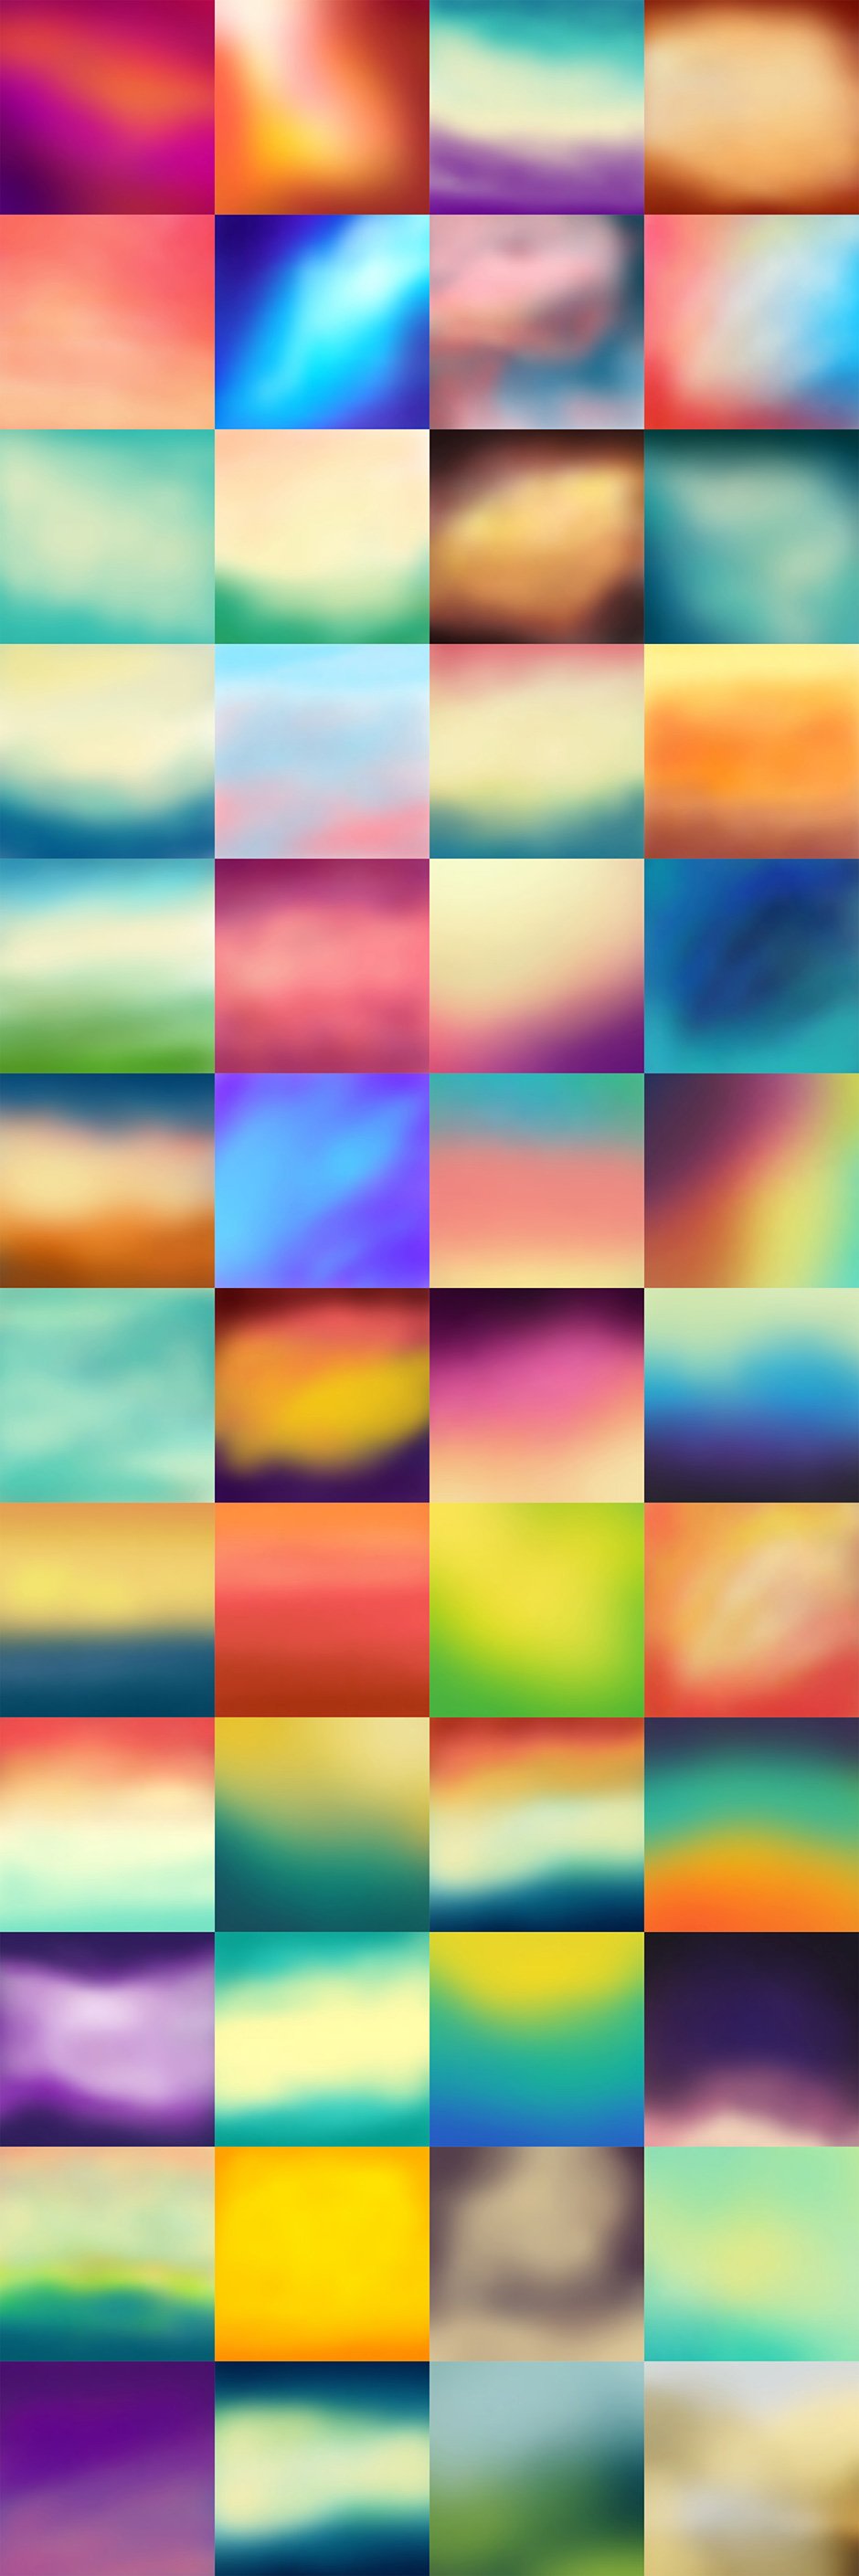 48 Vector Blurred Backgrounds